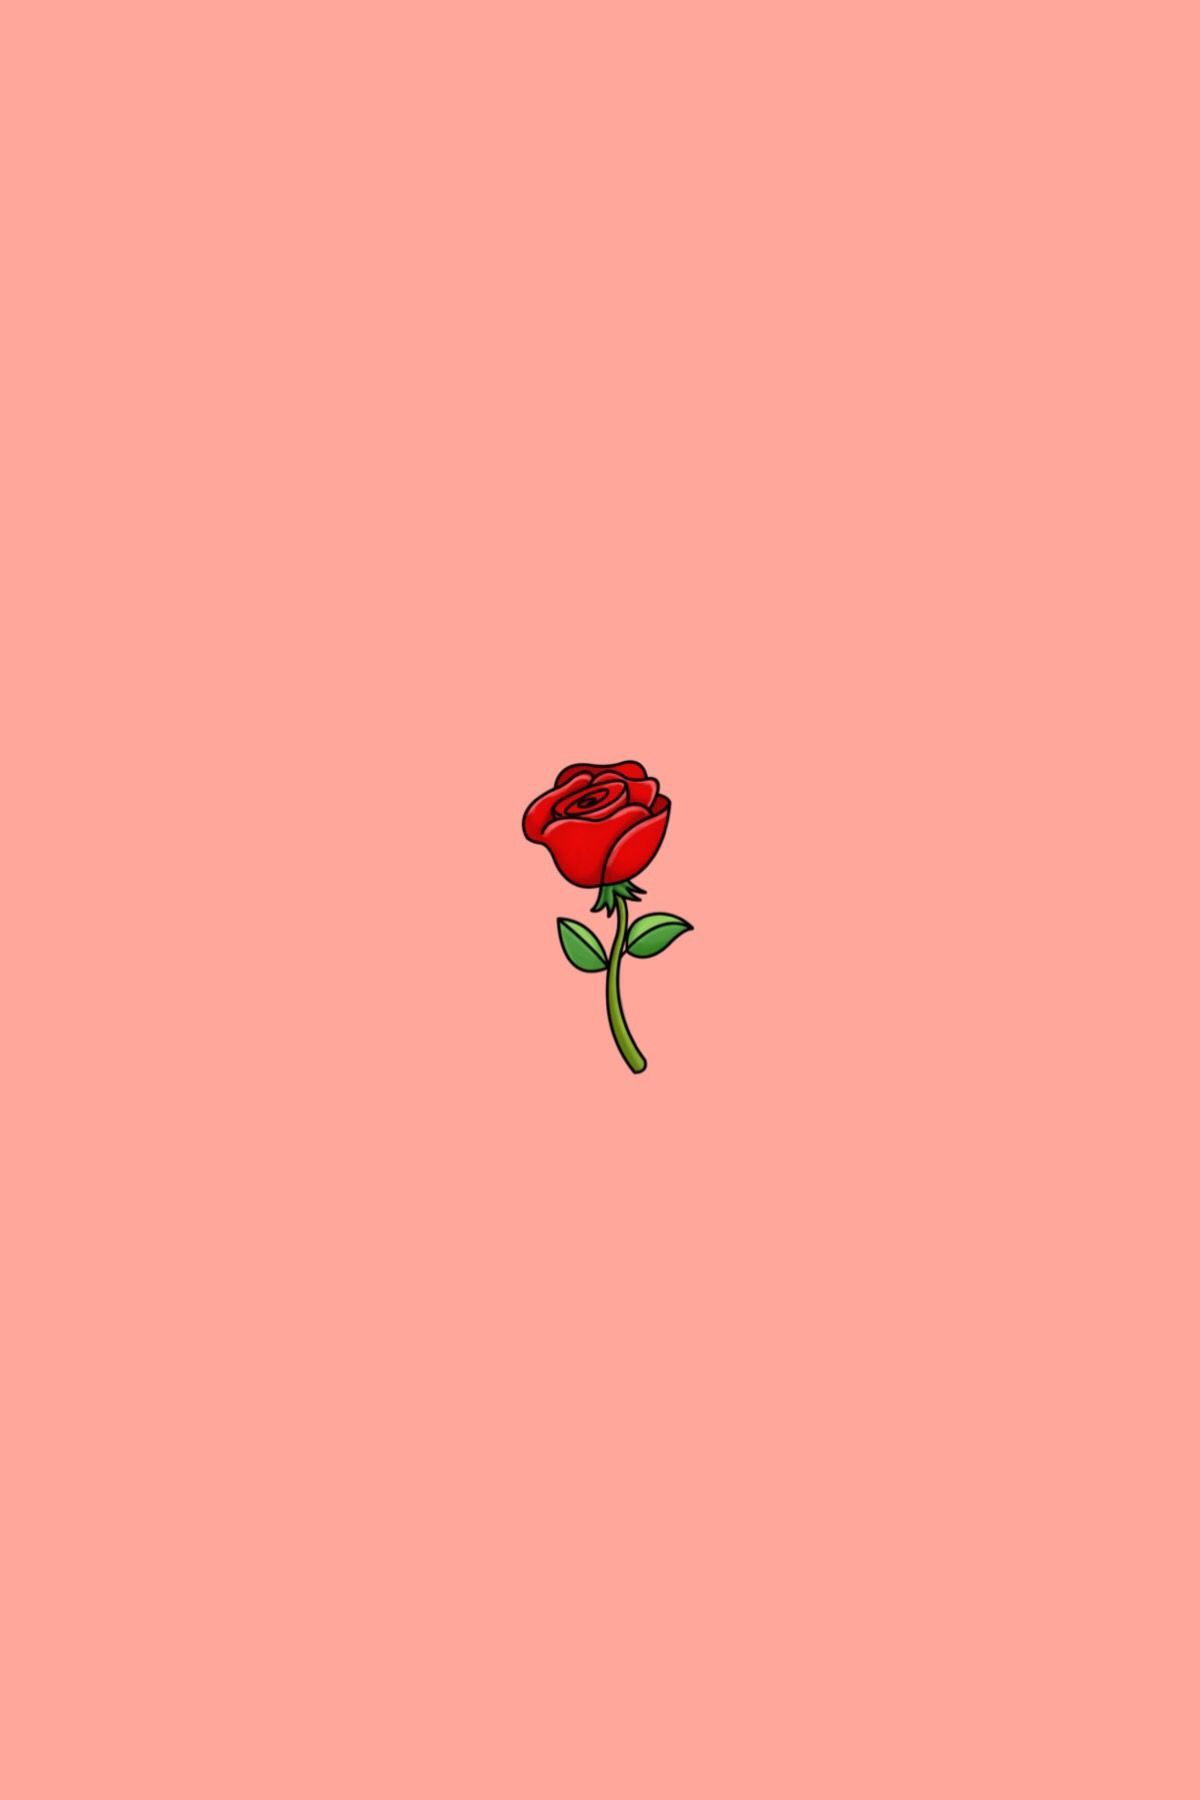 A red rose on pink background - Roses